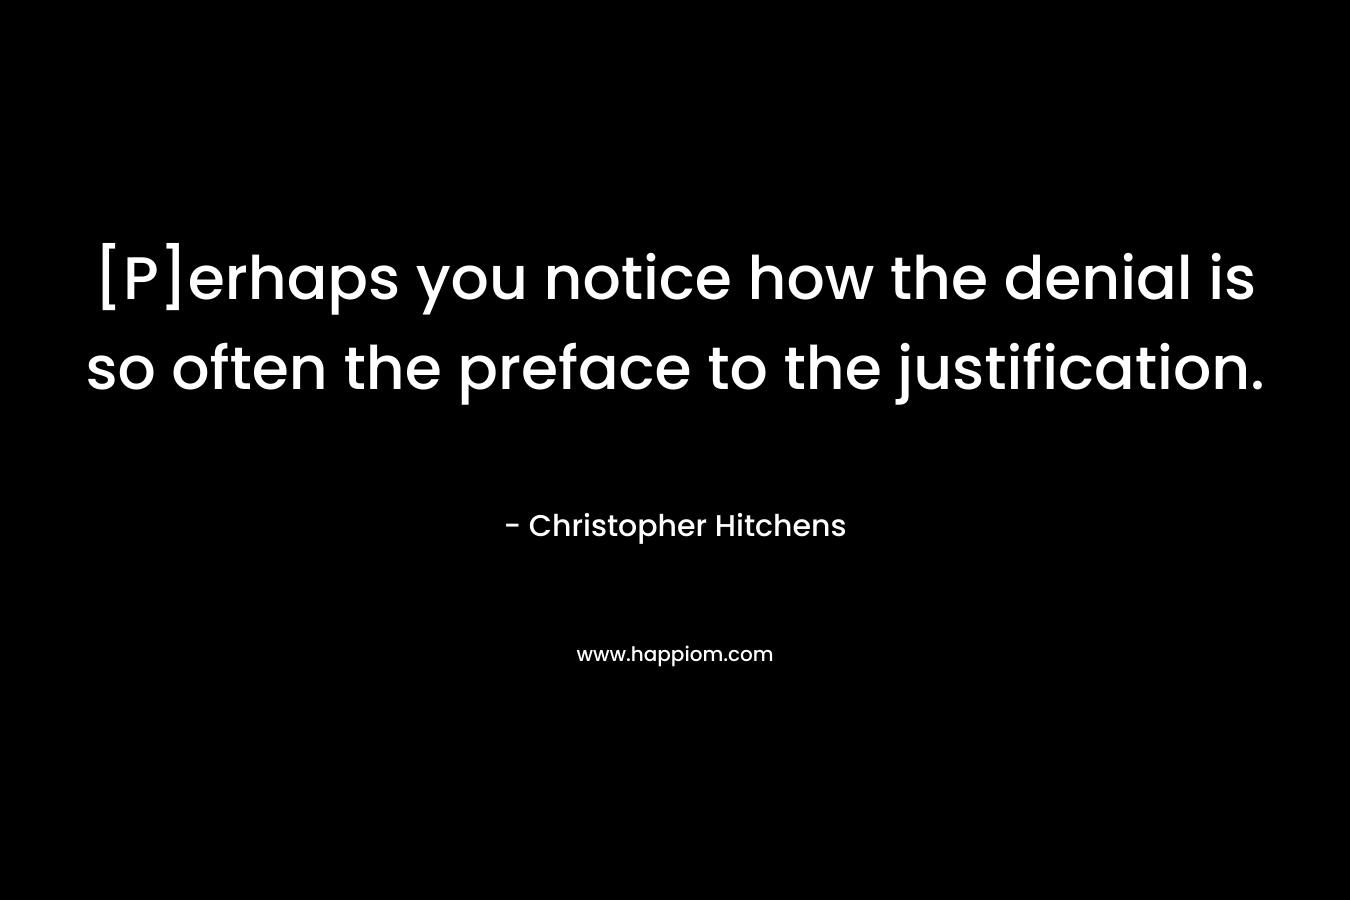 [P]erhaps you notice how the denial is so often the preface to the justification. – Christopher Hitchens